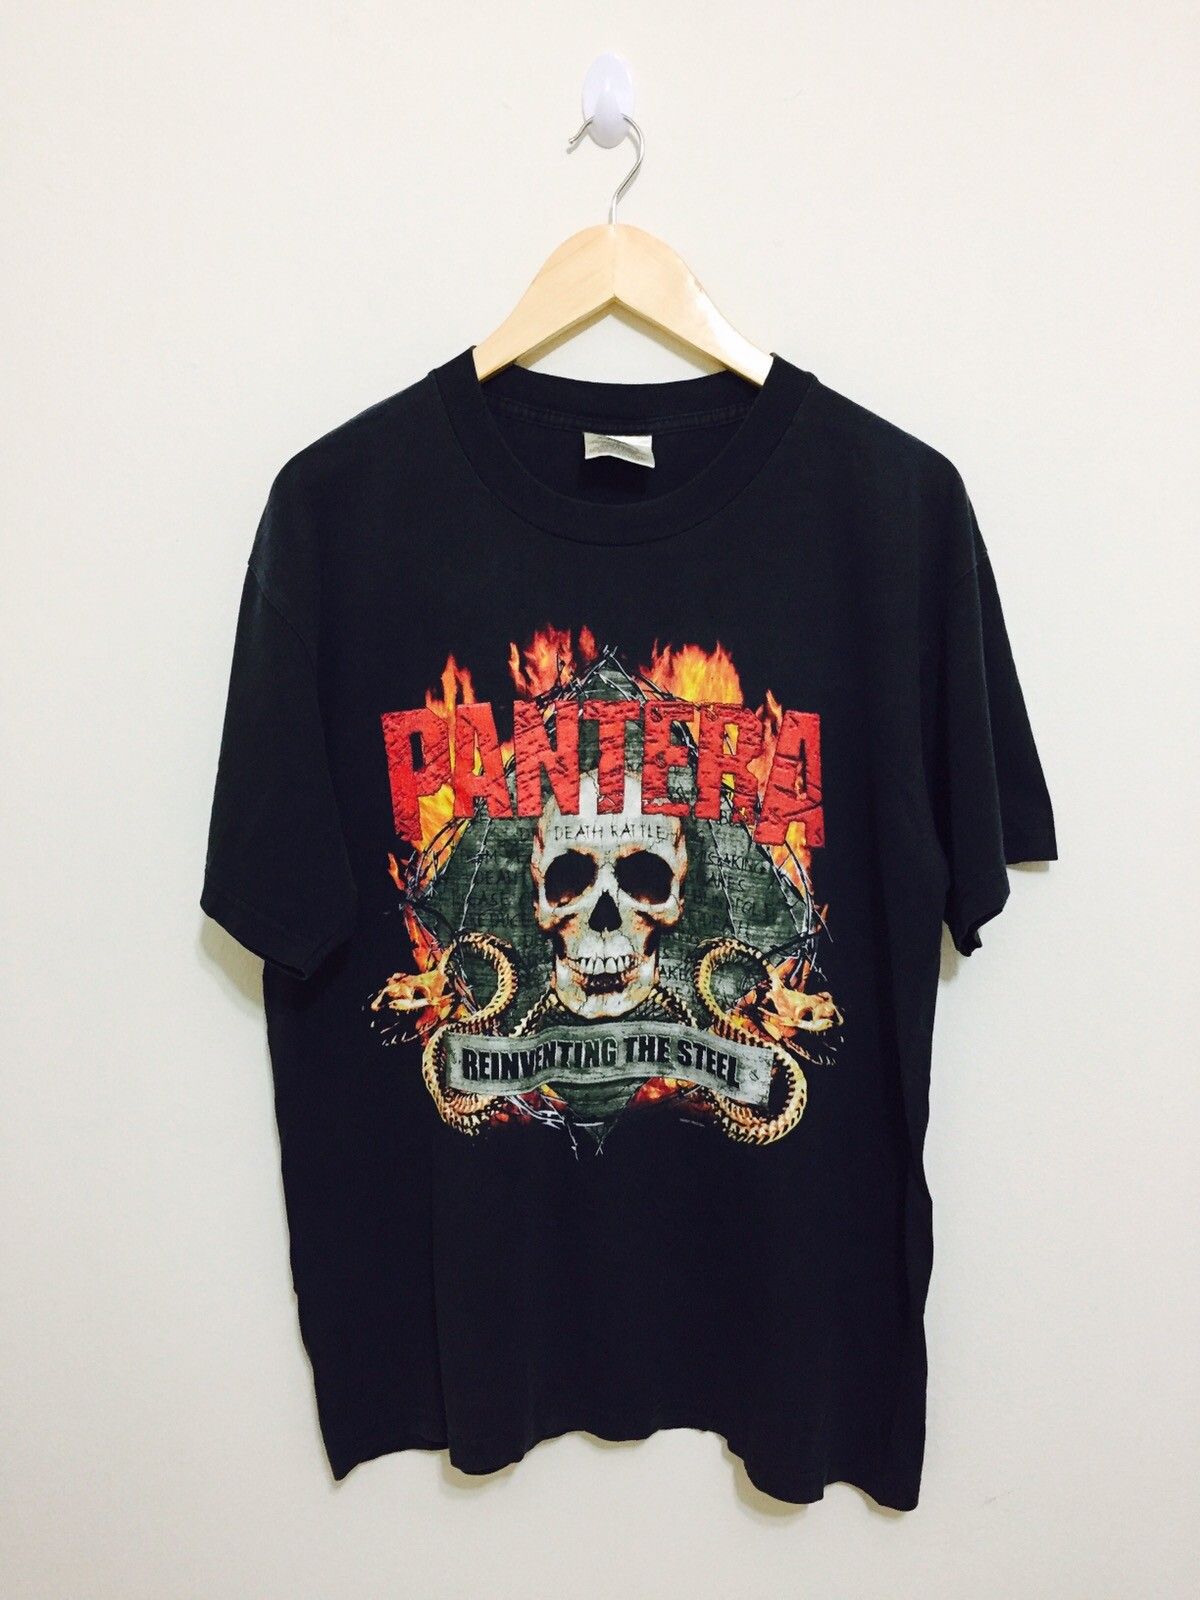 Vintage Vintage Pantera Shirt Early 2000s As Worn By Travis Scott | Grailed